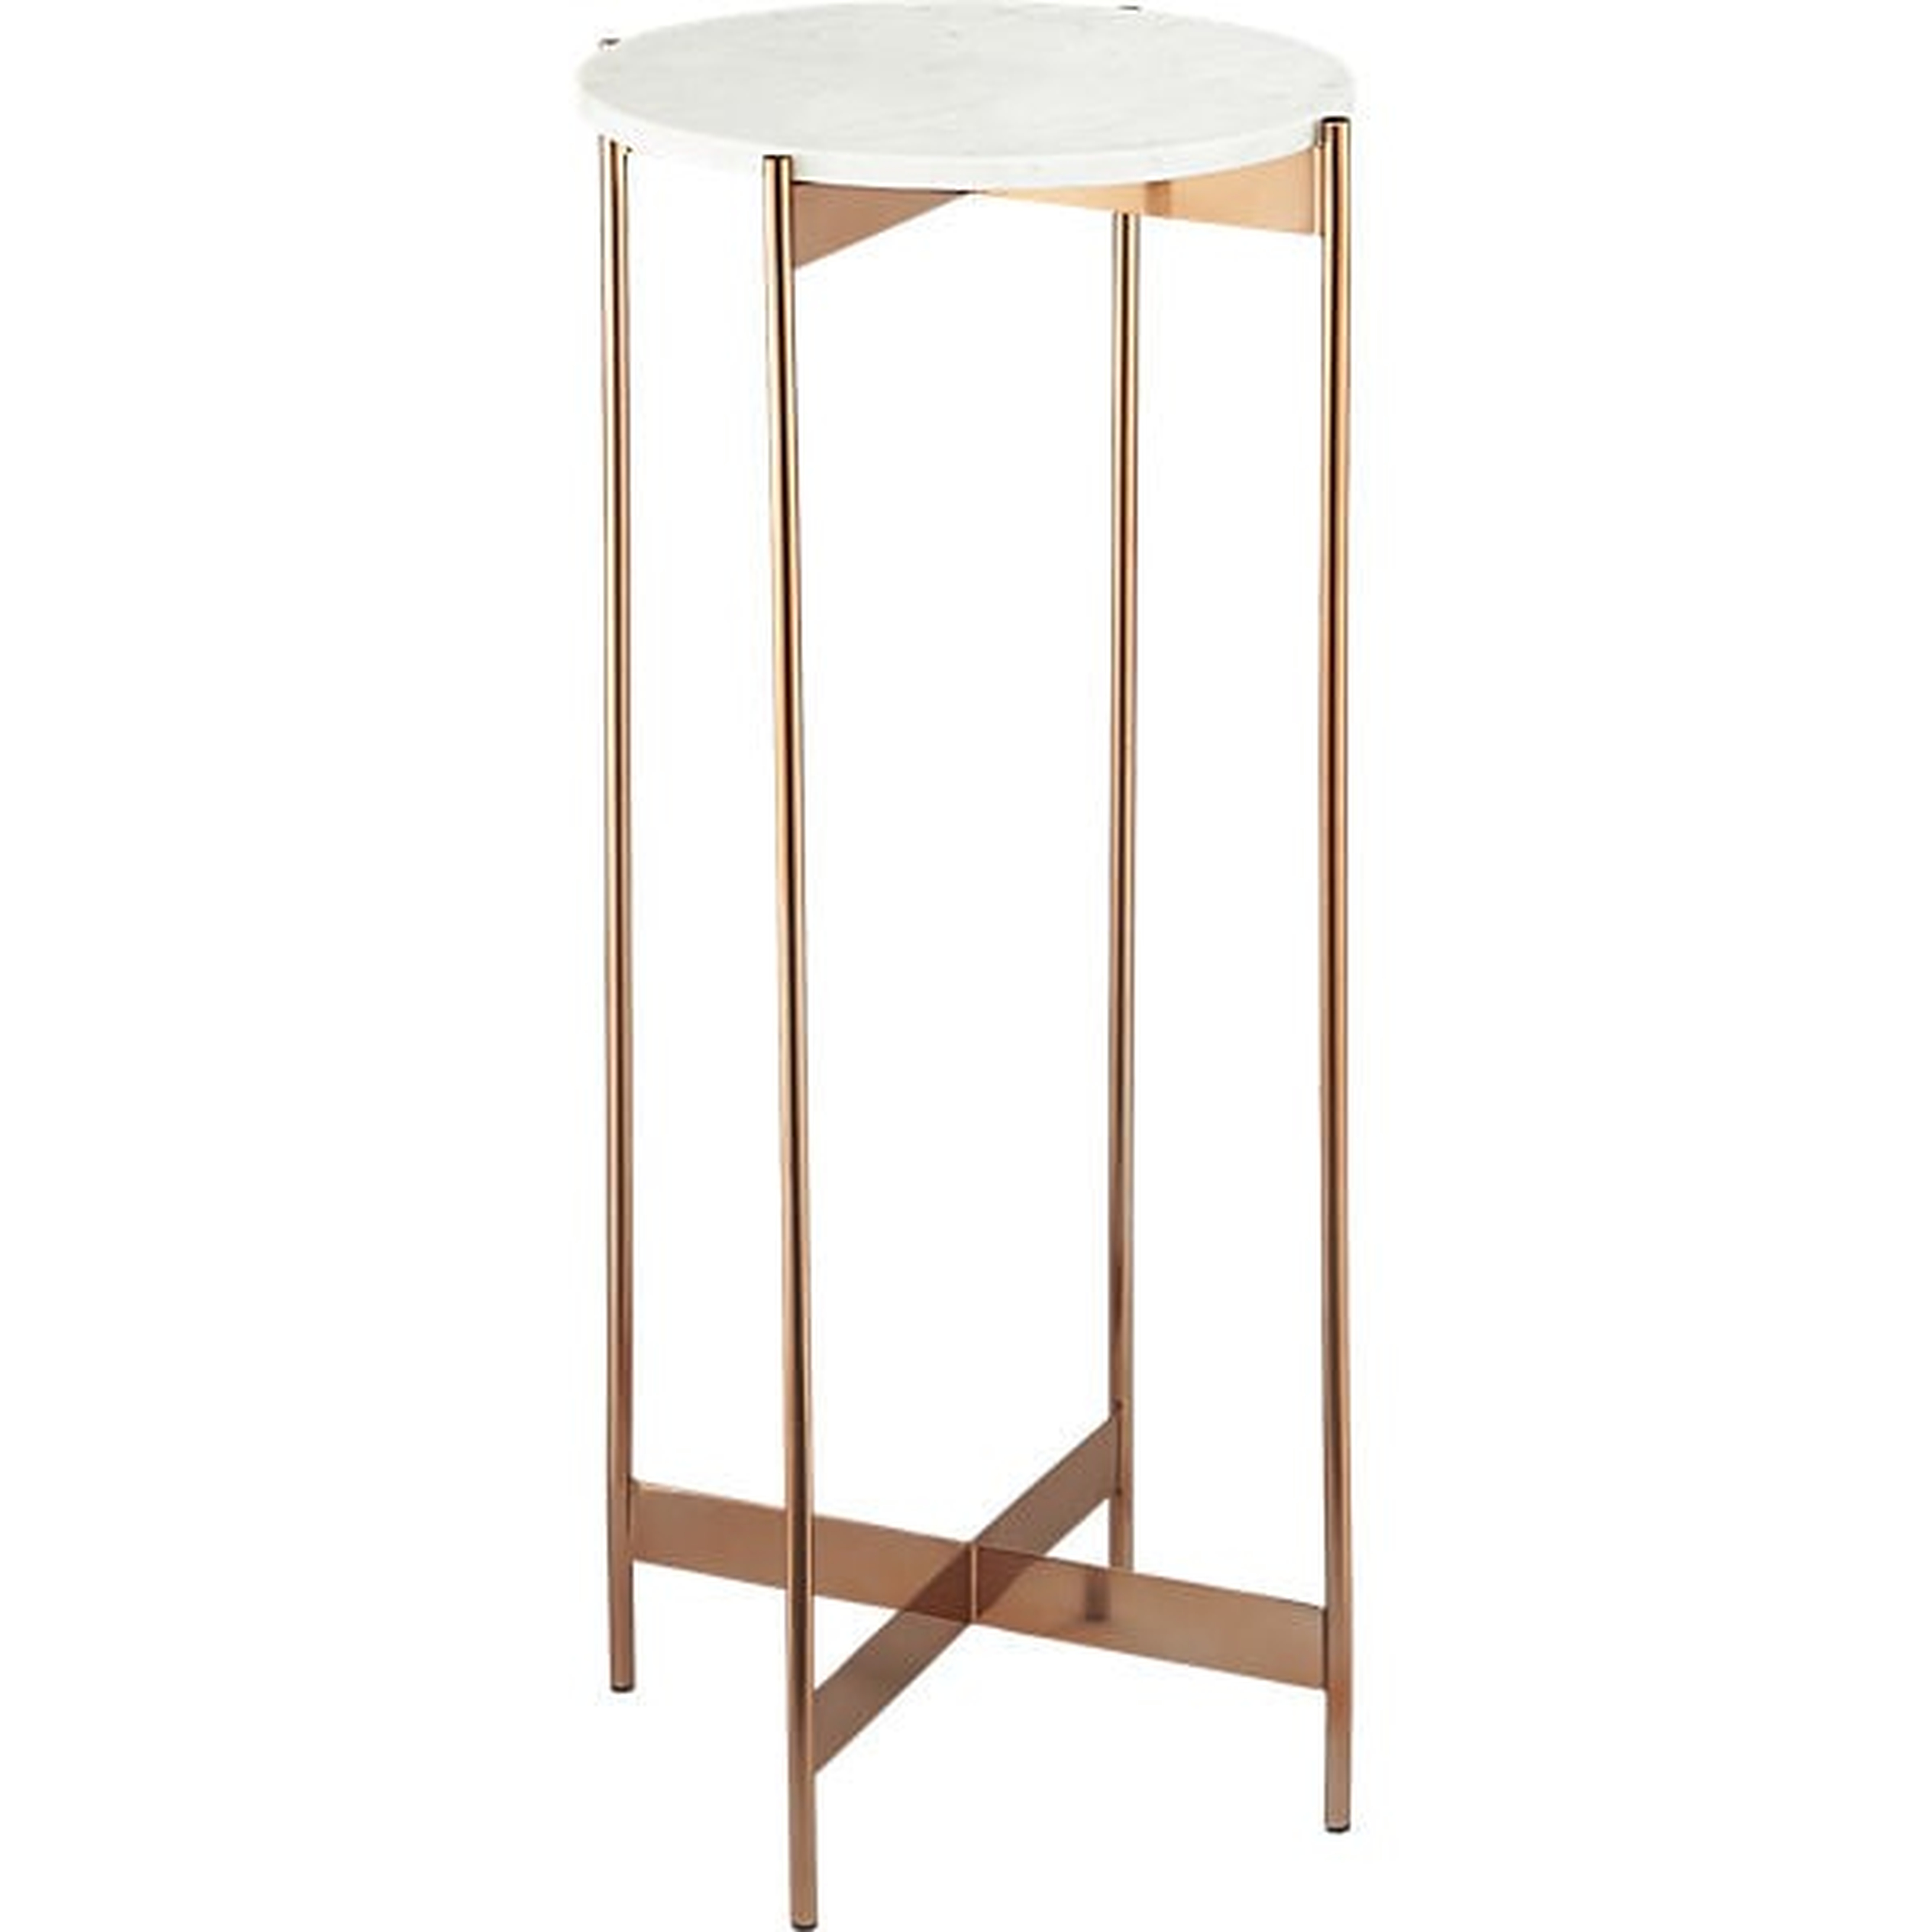 Marble-rose gold tall pedestal table - CB2